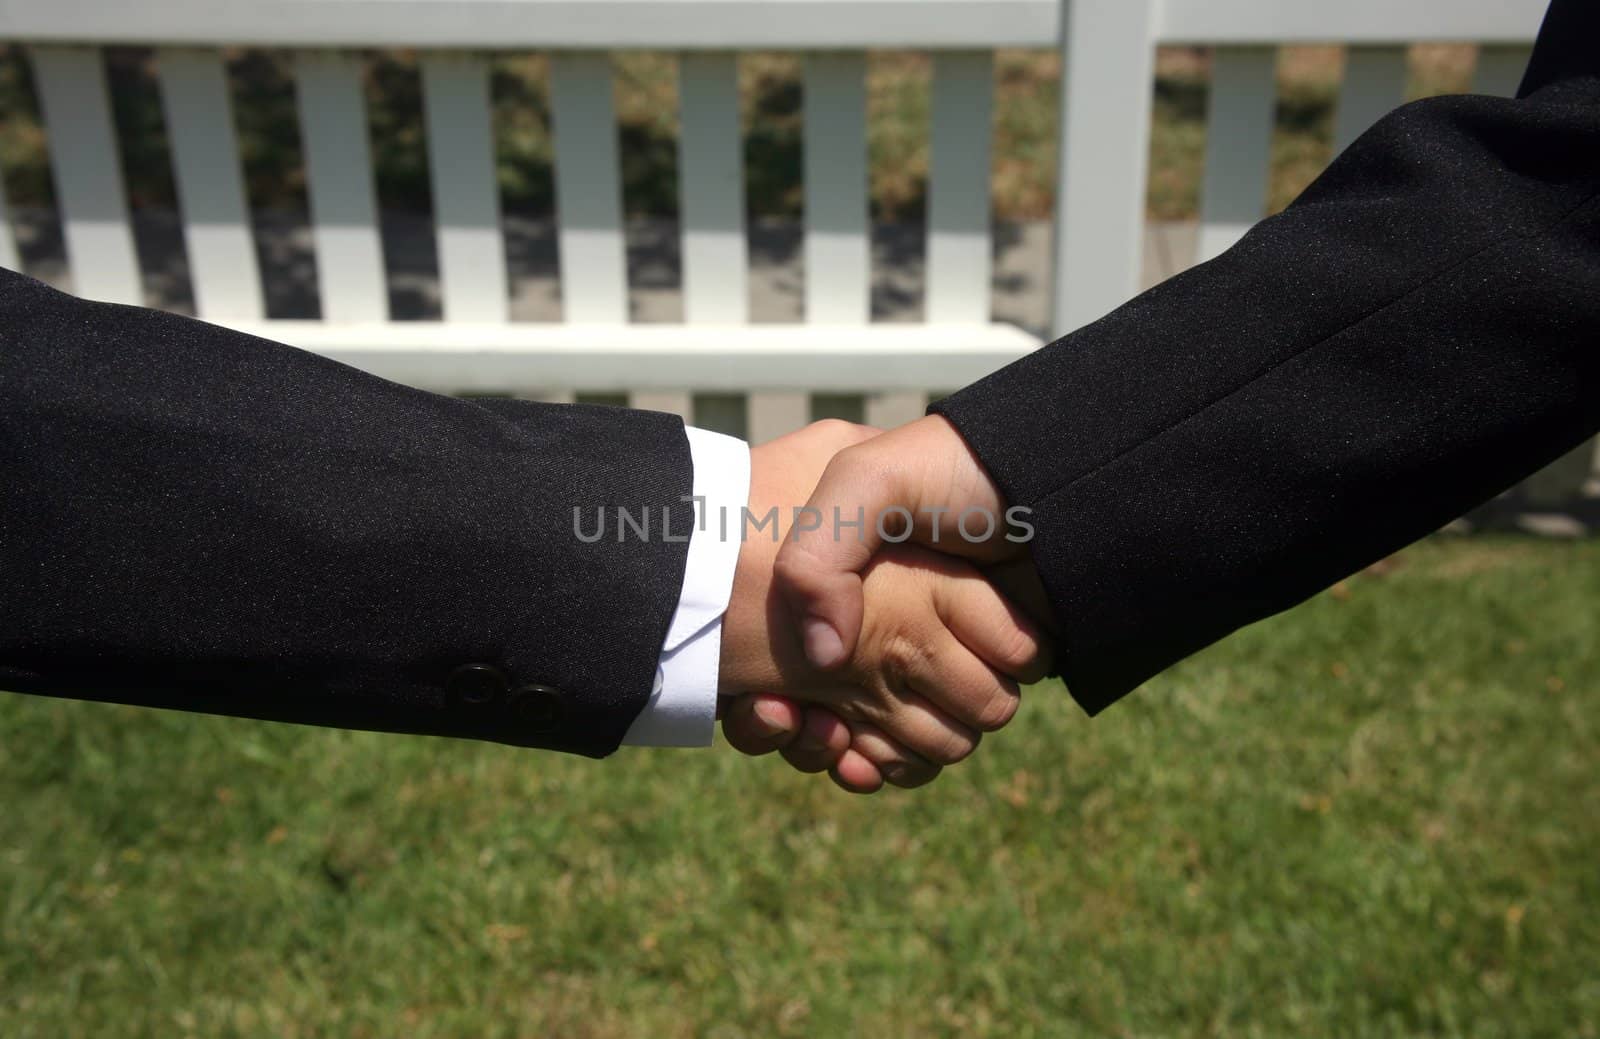 Handshake between two men for an agreed upon business deal